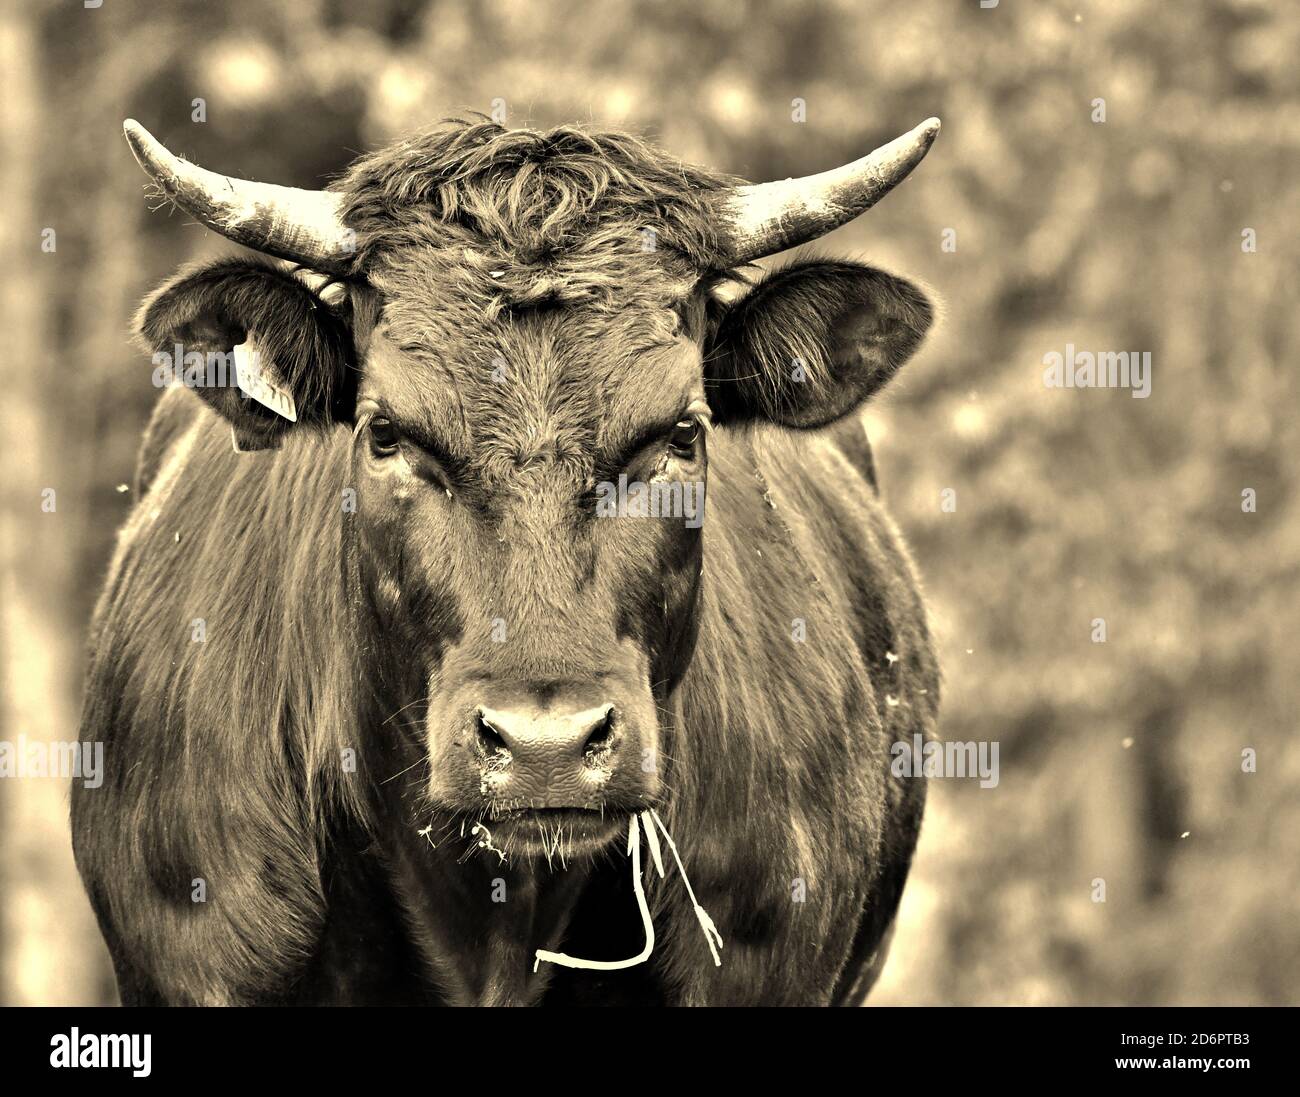 black cow with horns looking straight in camera Stock Photo